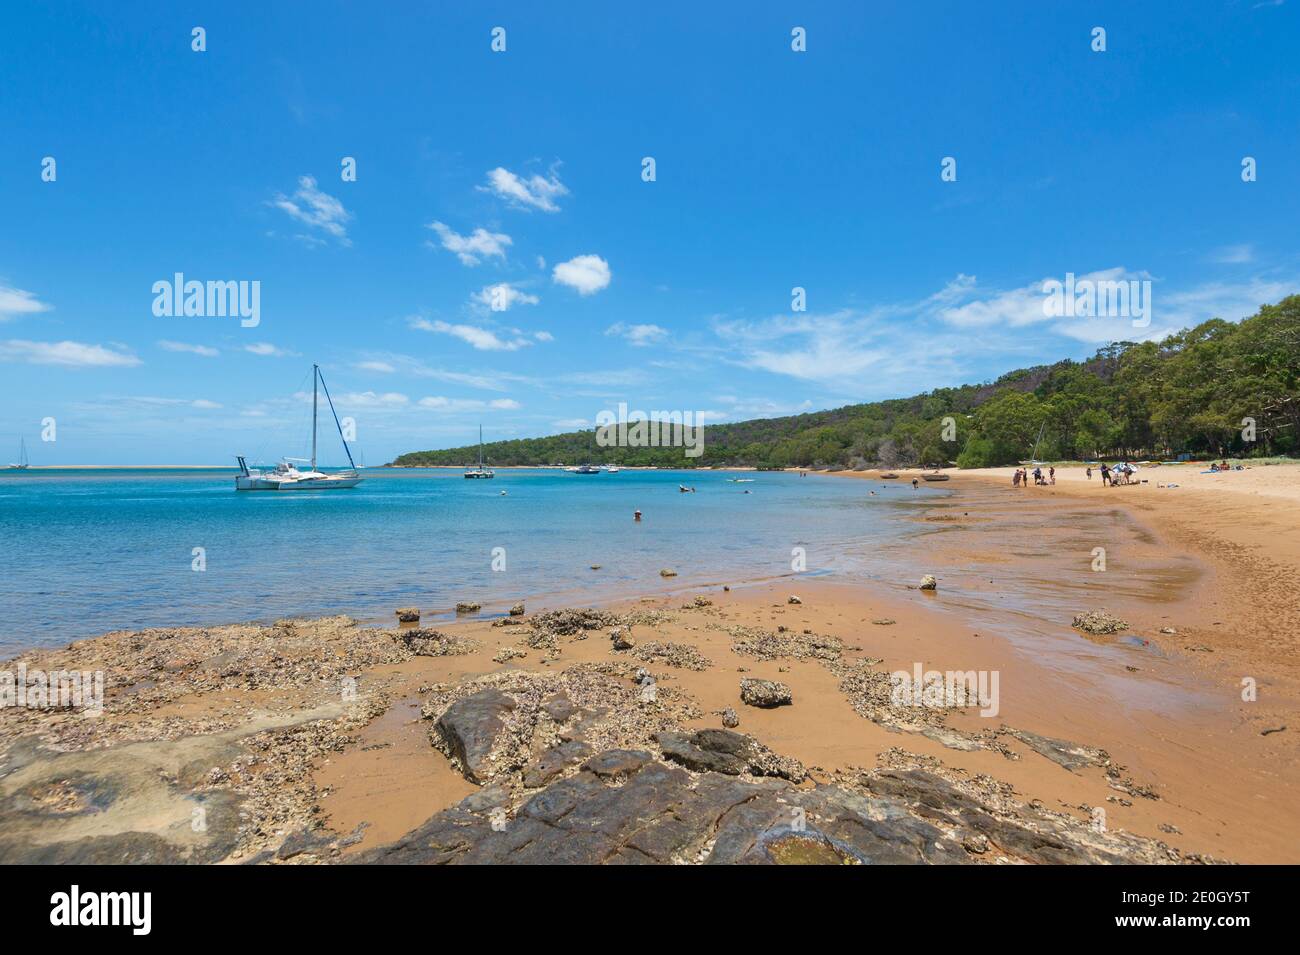 View of the sandy beach at the Town of 1770 (Seventeen Seventy), Queensland, QLD, Australia Stock Photo